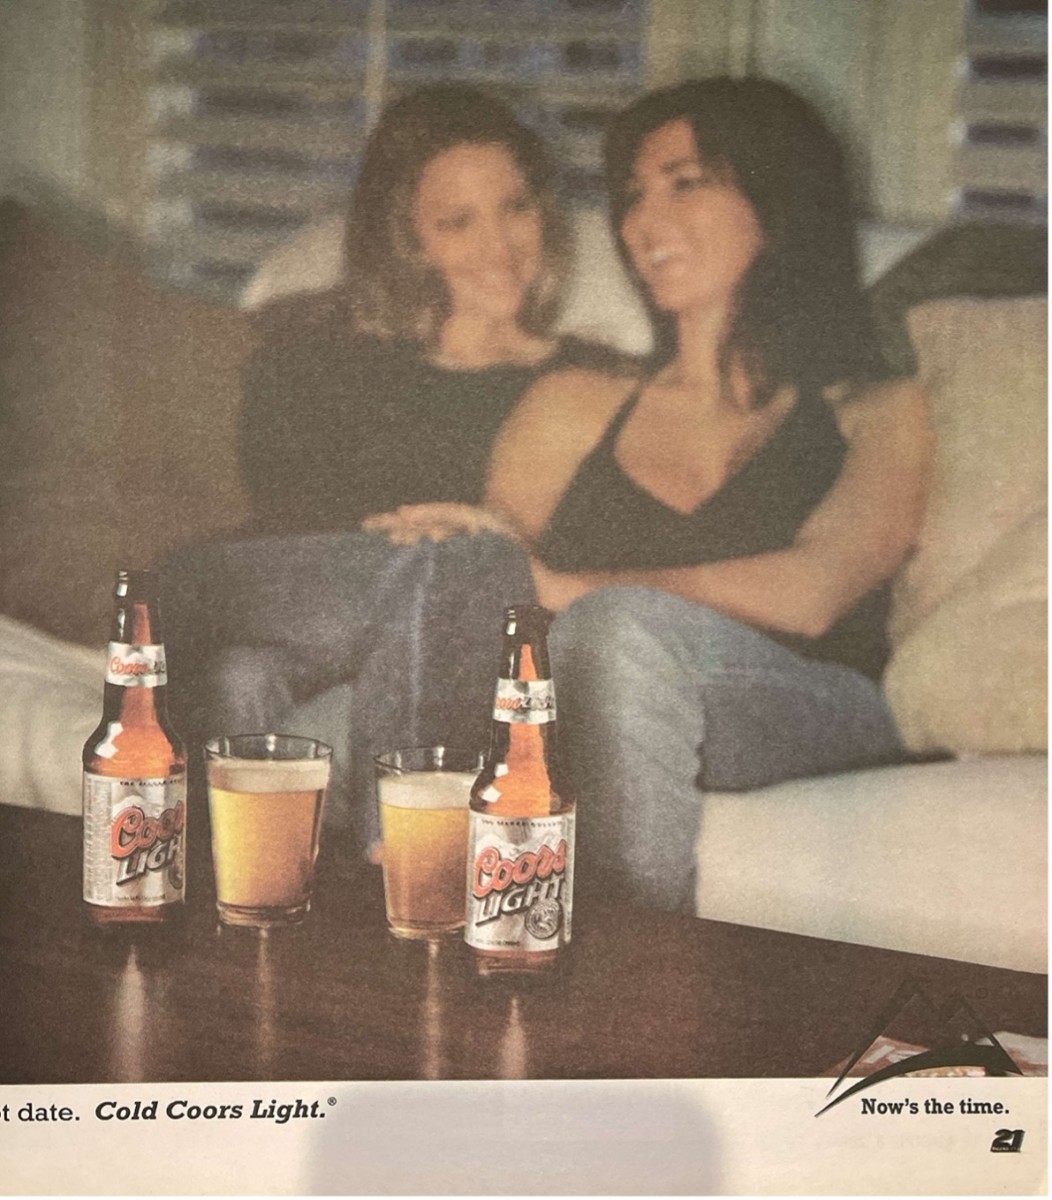 Full page, colored ads by Coors lying to the lesbian community. Coors, in fact, was a major enemy of the LGBTQ community and funded lesbian-bashing.